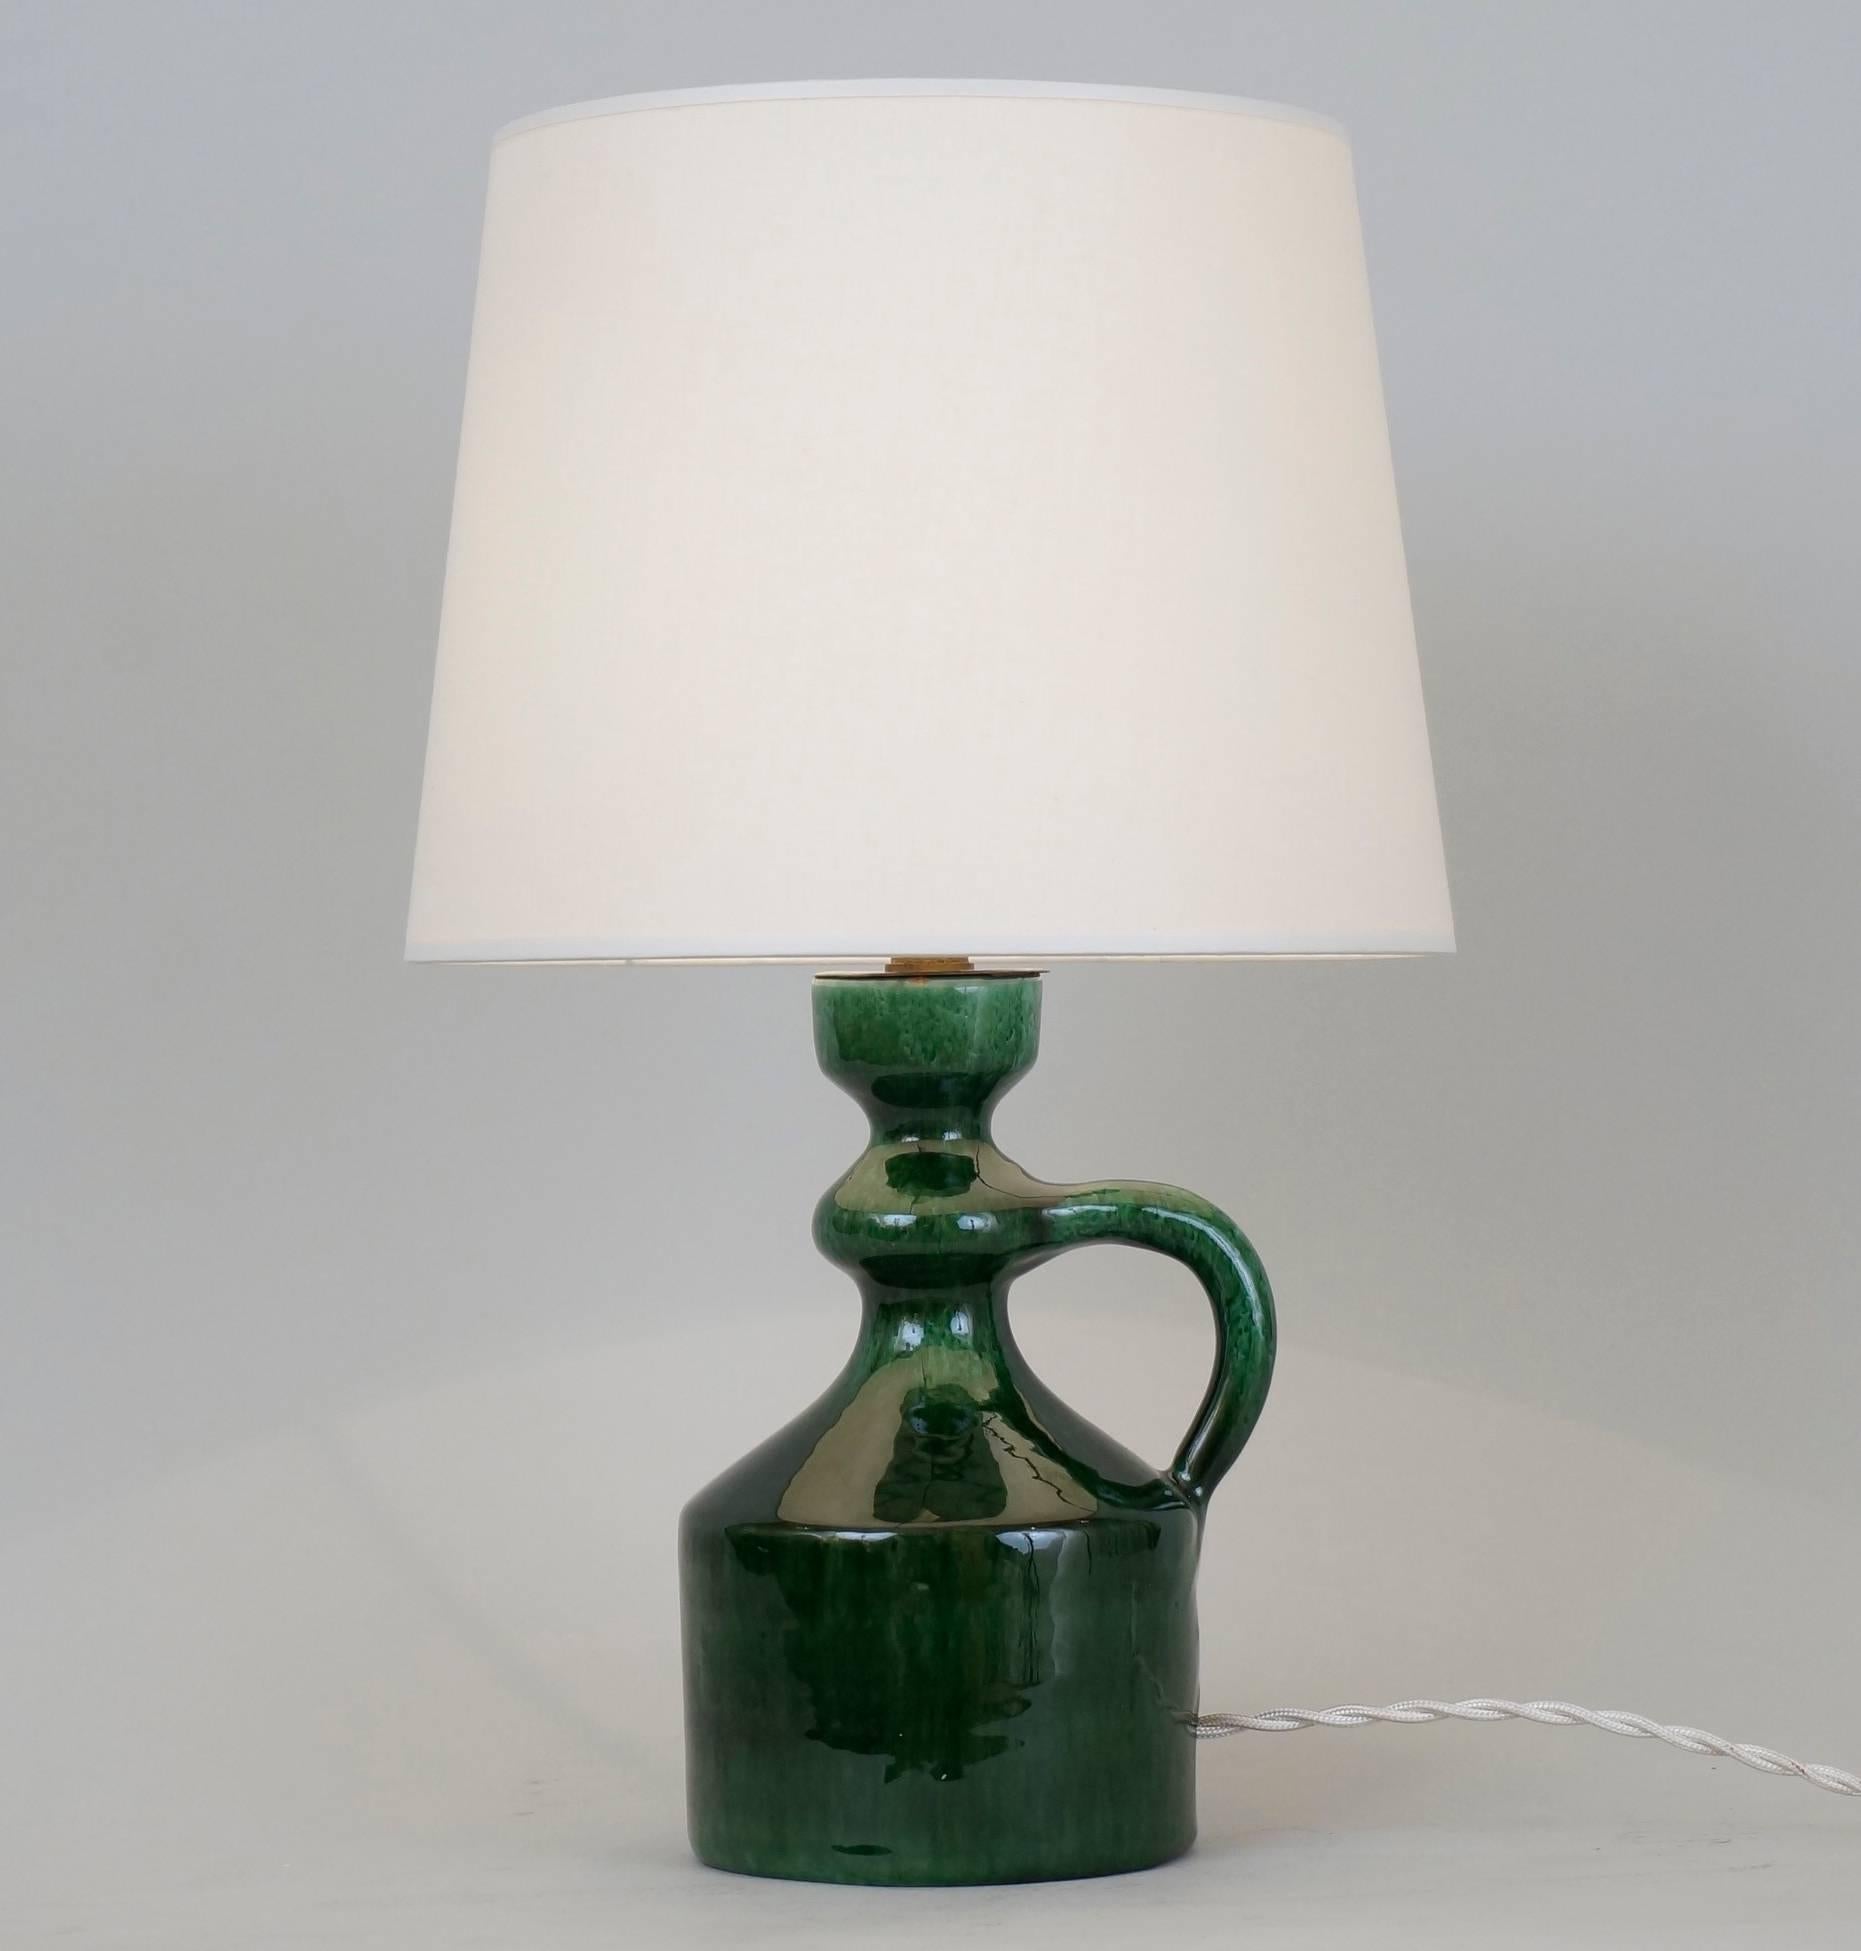 Green enameled ceramic table lamp by André Freymond signed on the back.
Custom-made lampshade.
Rewired with twisted silk cord.
US plug on request.
Measures: Ceramic height 19 cm - 7.5inches.
Height with lampshade: 36 cm - 14.2inches.

